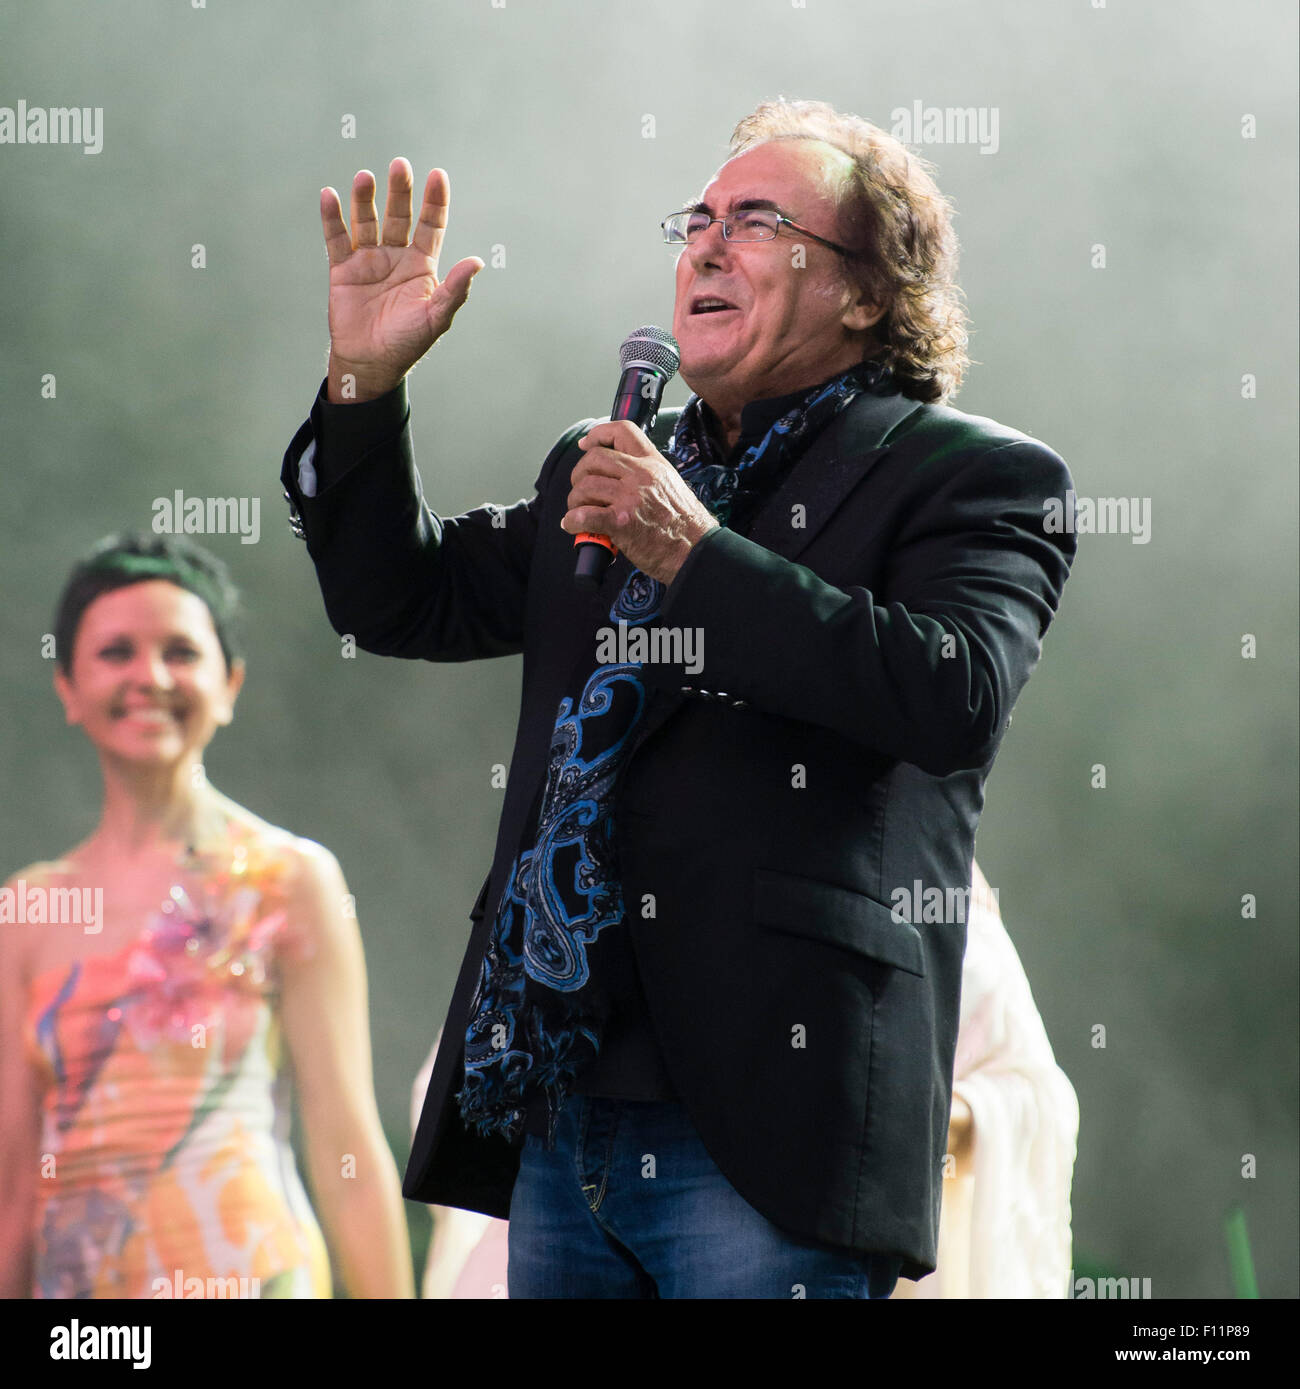 Berlin, Germany. 21st Aug, 2015. Albano Carrisi (Al Bano) performs on stage during a concert with Romina Power (unseen) in Berlin, Germany, 21 August 2015. The concert of the singing duo Al Bano and Romina Power was their first in the German-speaking region in 20 years. Photo: Gregor Fischer/dpa/Alamy Live News Stock Photo